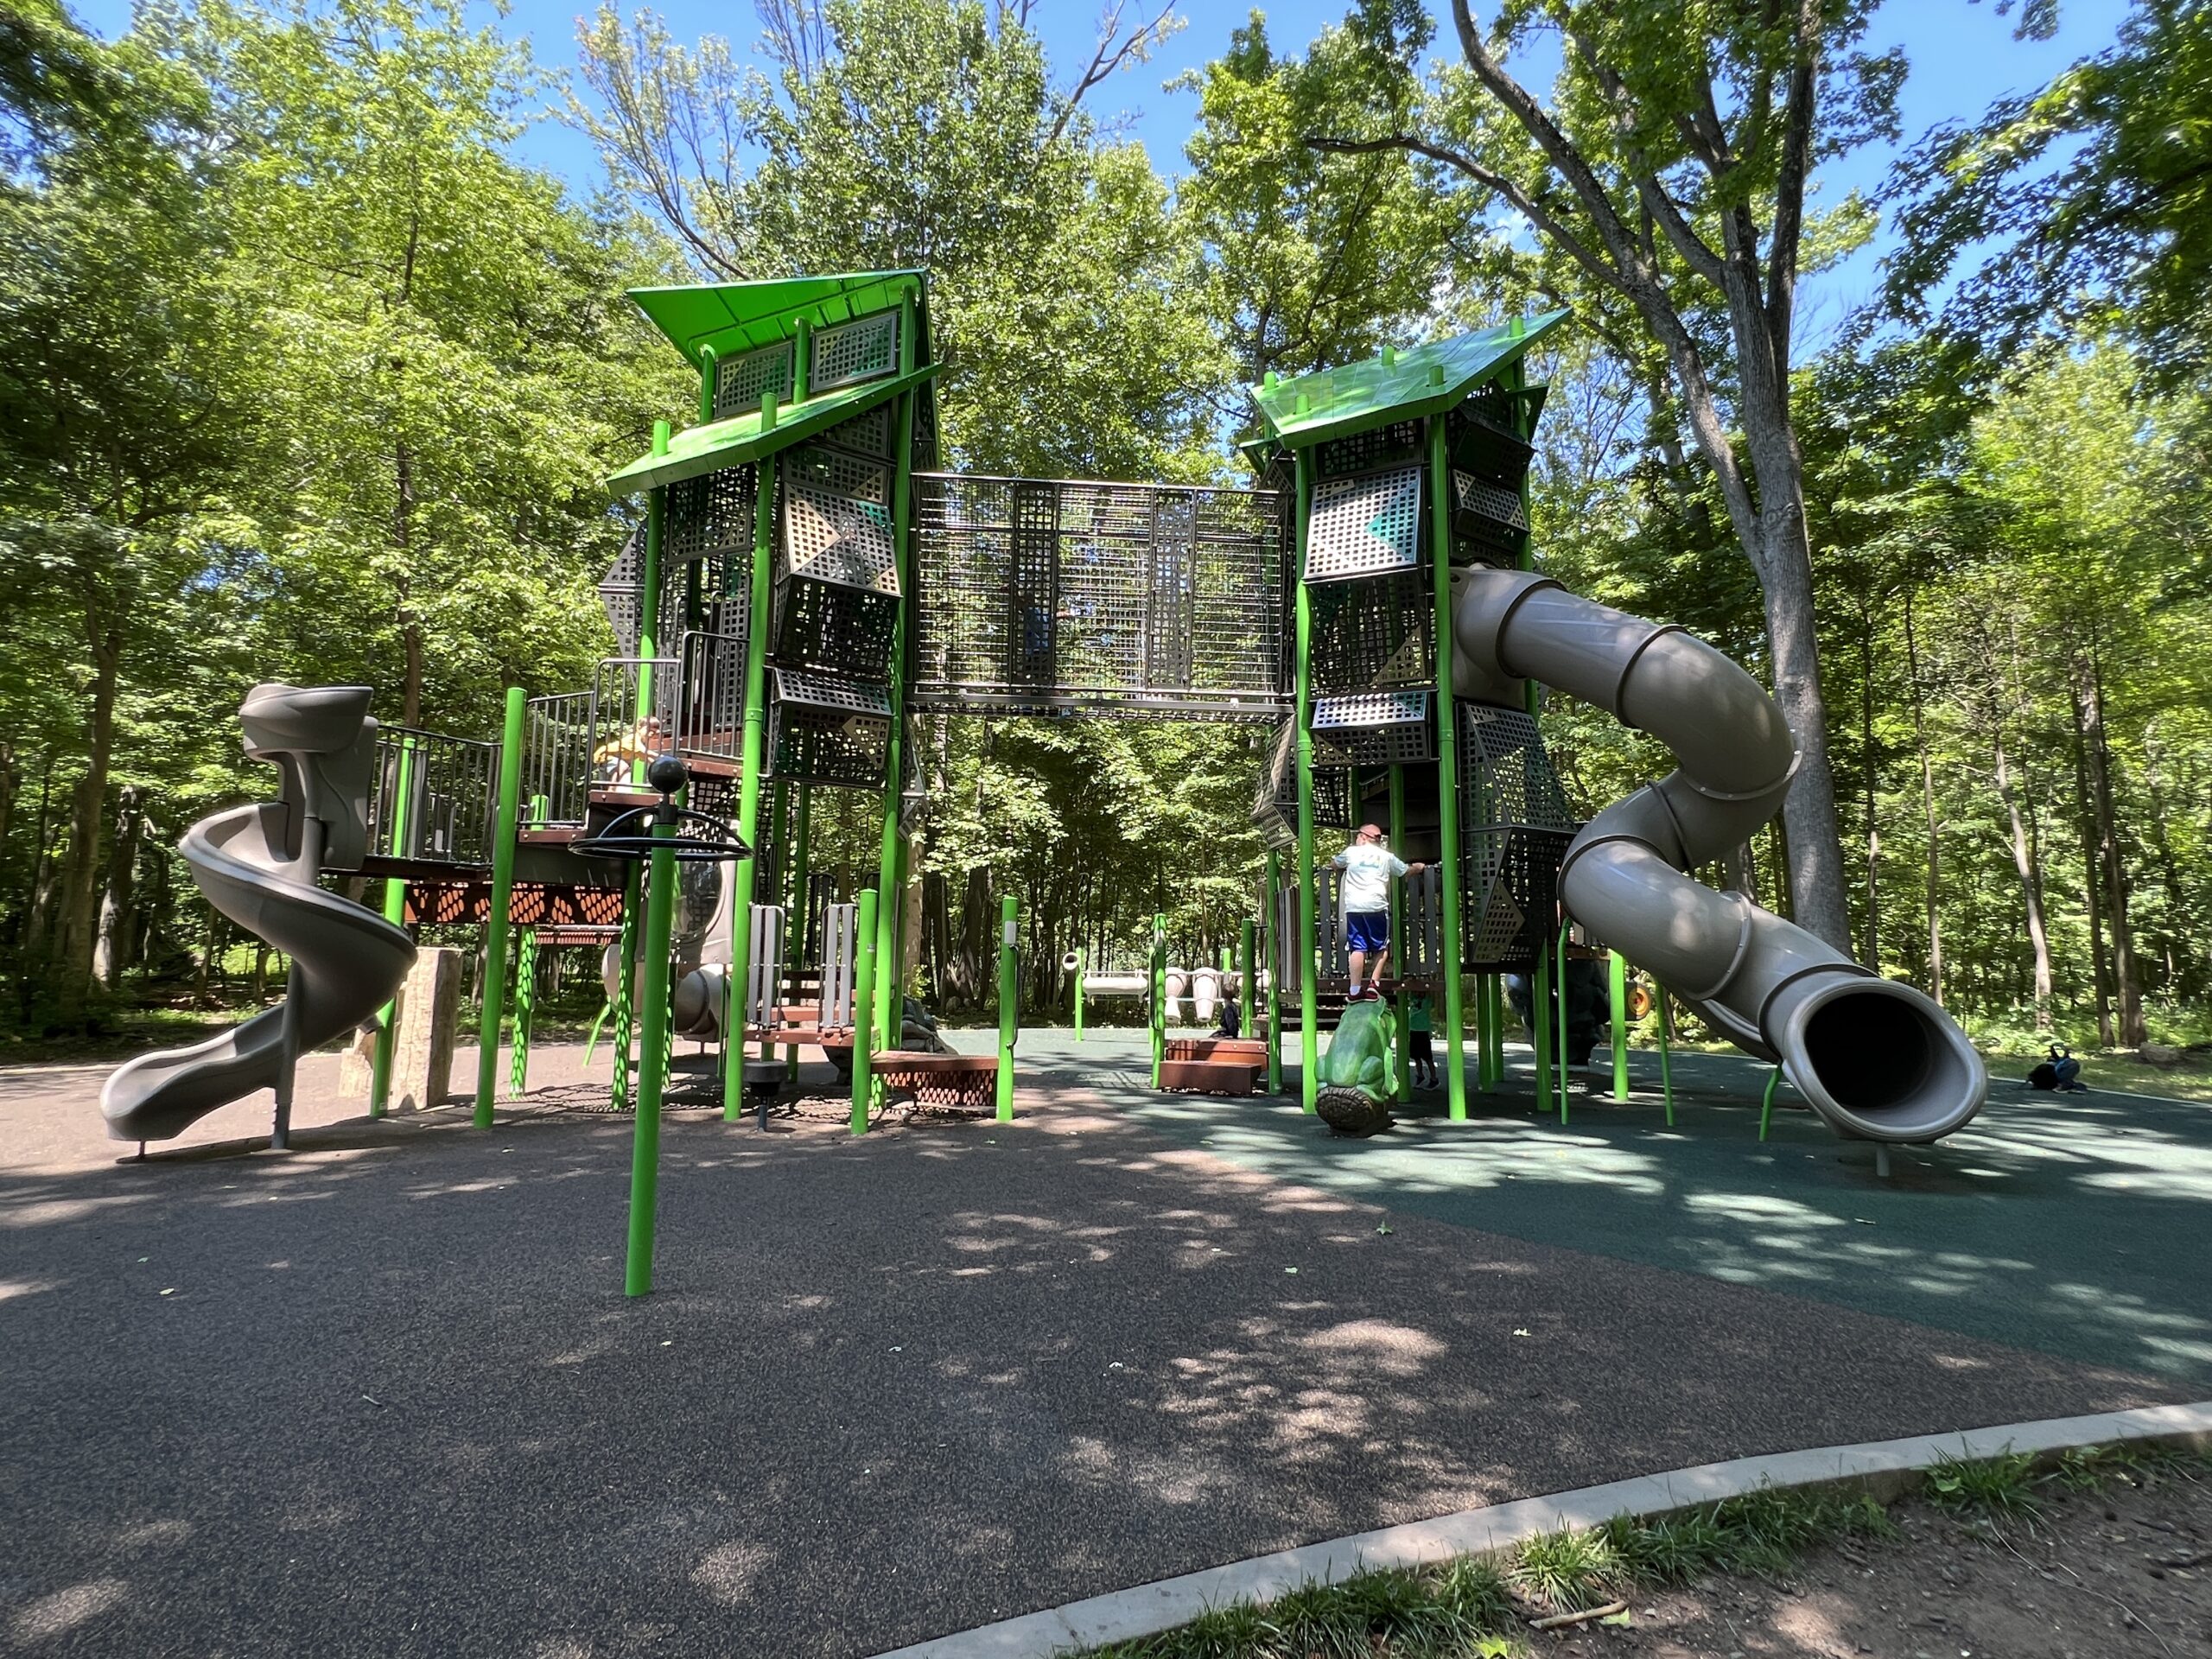 Nomahegan Park Playground in Cranford NJ - WIDE image - larger playground side view side with frog